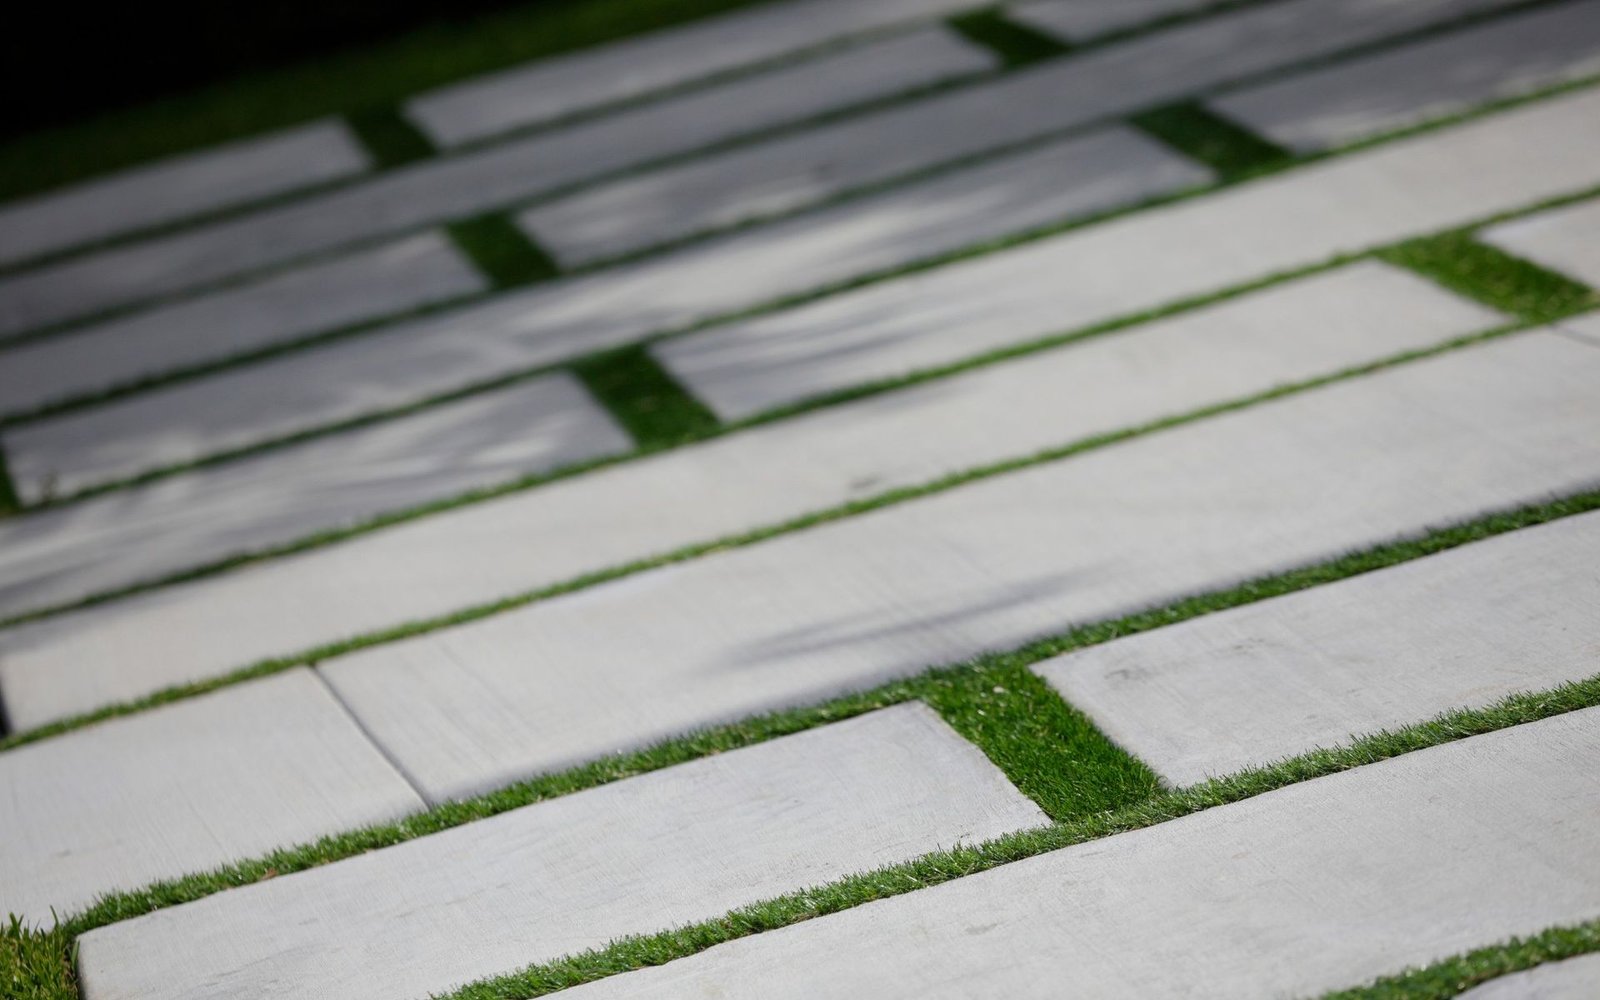 A close-up photo of a pathway composed of rectangular white stepping stones placed in a grid pattern. Green grass, courtesy of professional turf installers, fills the gaps between the stones, creating a visually appealing contrast. Shadows of nearby objects are cast on the pathway in this St. Bradenton outdoor space.